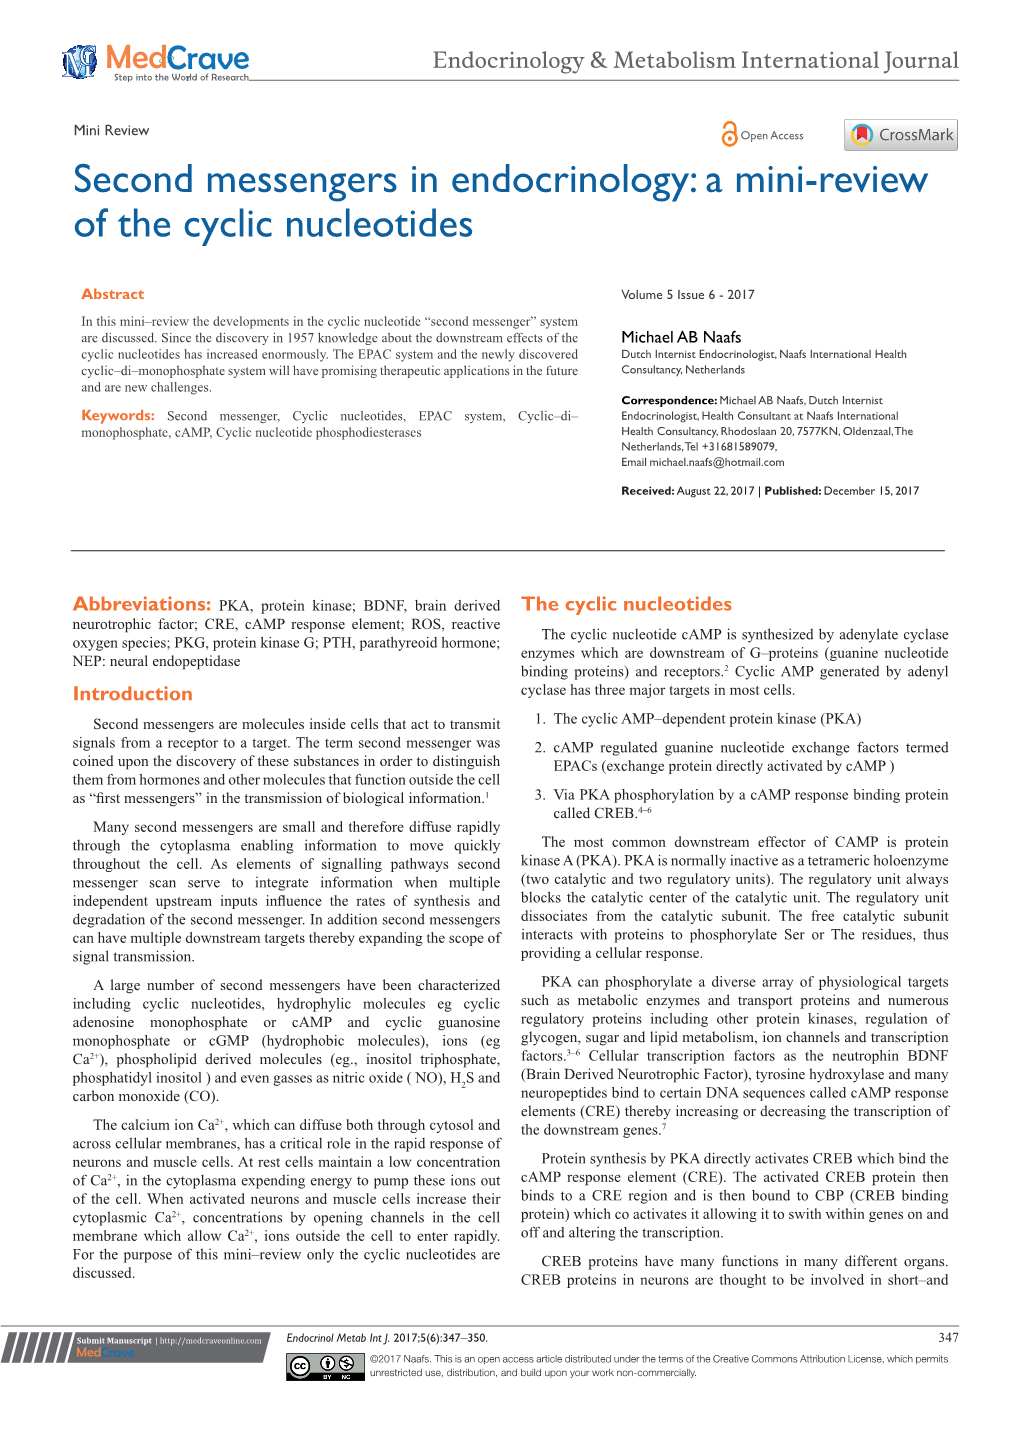 Second Messengers in Endocrinology: a Mini‒Review of the Cyclic Nucleotides